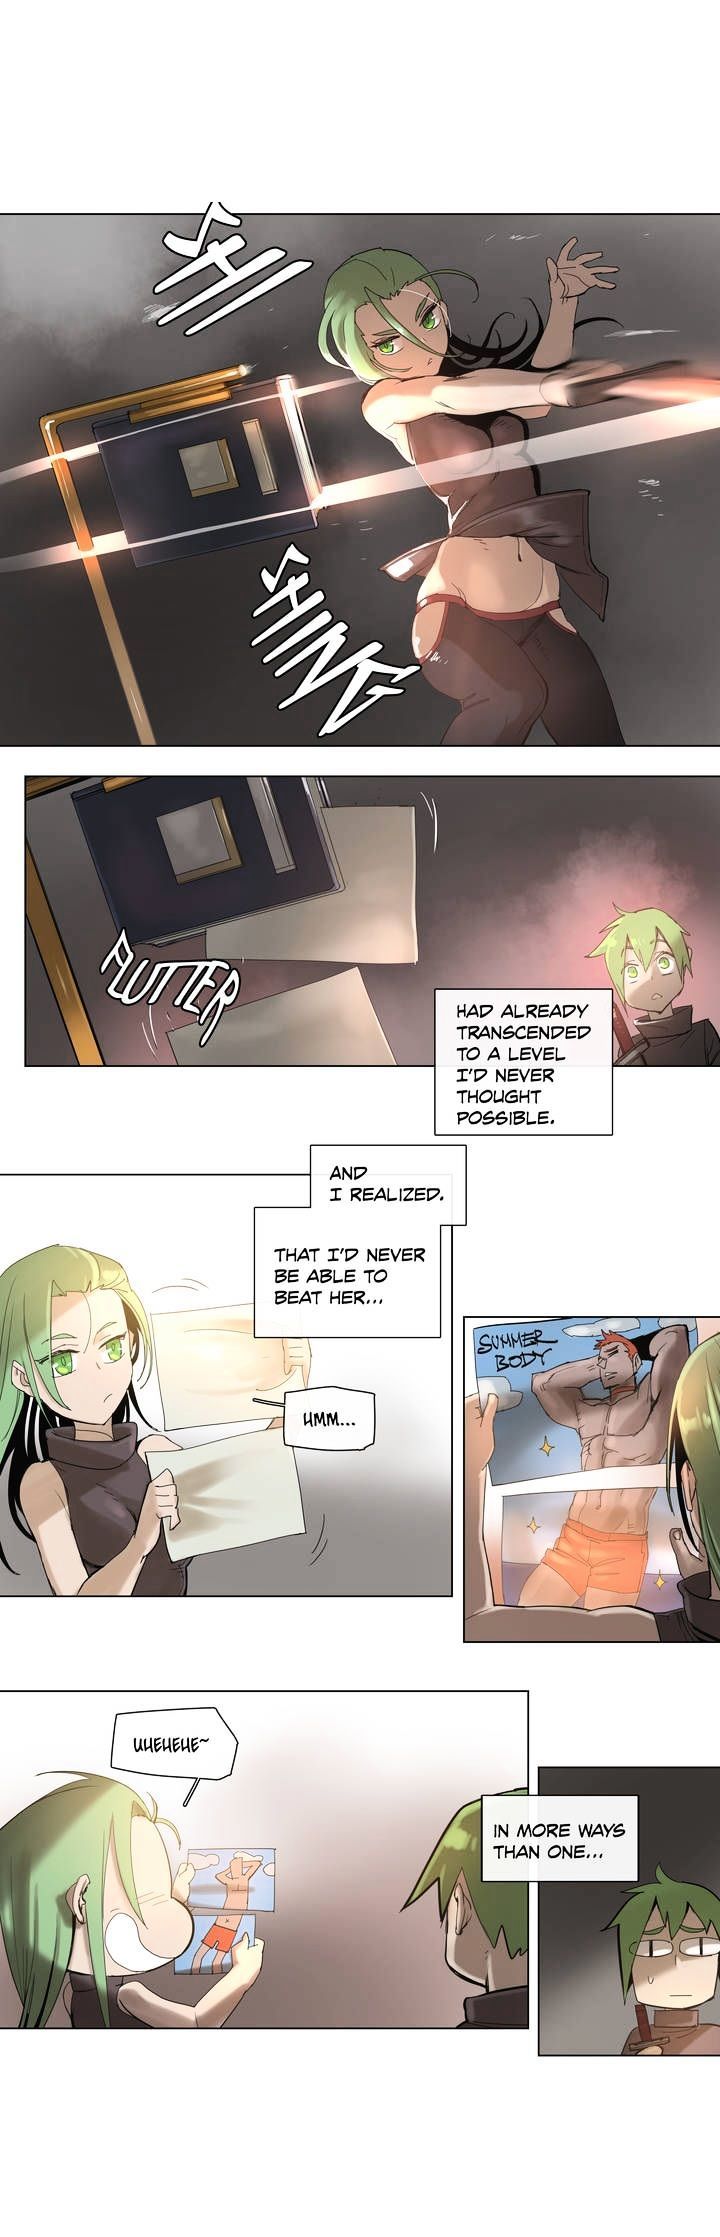 4 Cut Hero Chapter 43 page 3